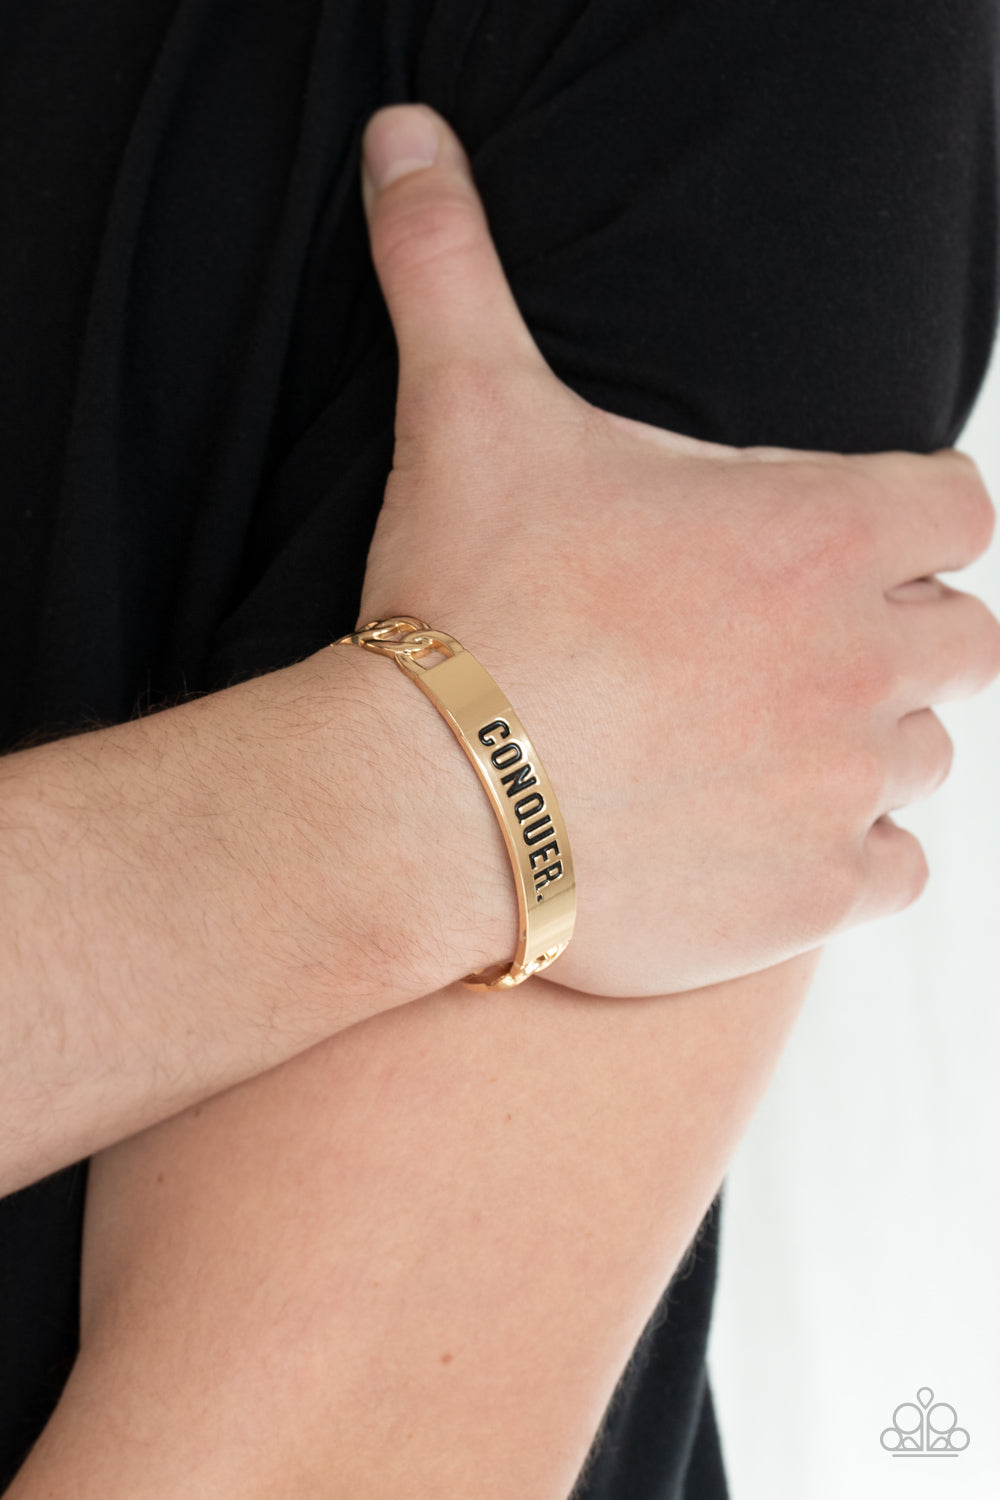 Conquer Your Fears - Gold - Bracelets - Paparazzi Accessories